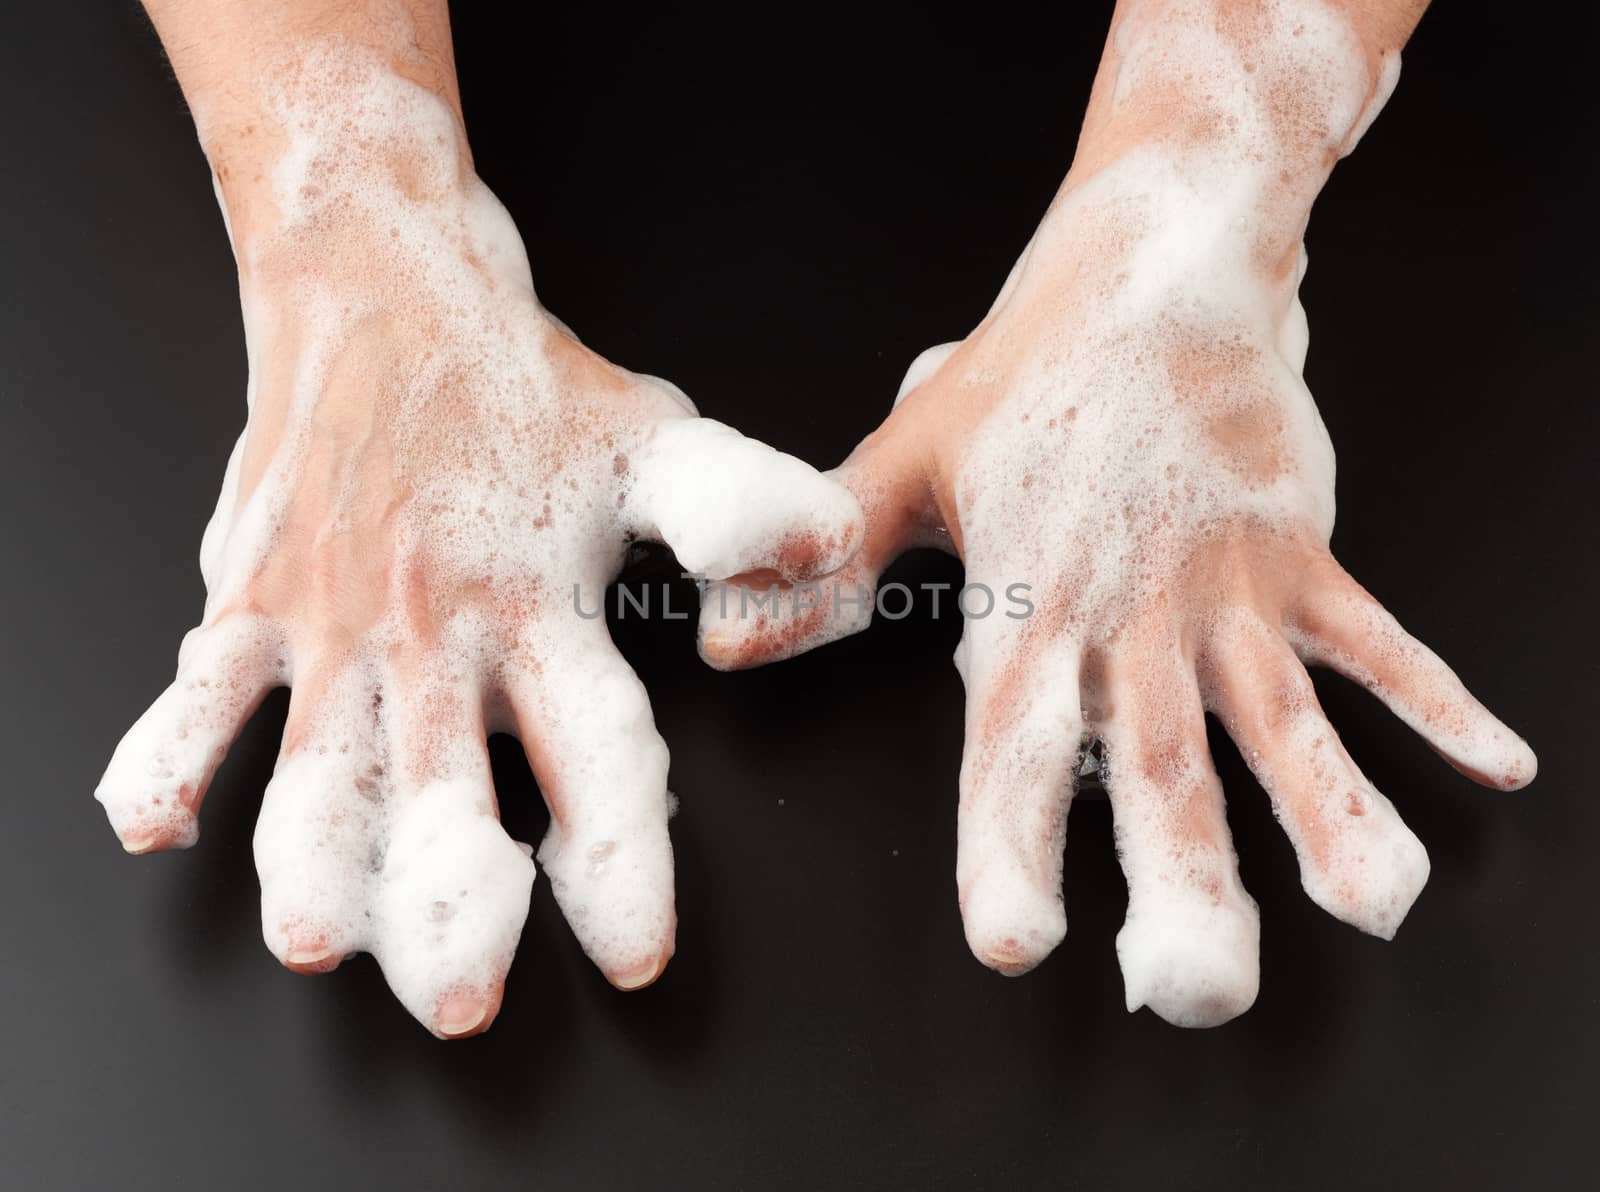 female hands in white soap suds on a black background, concept of washing hands against bacteria, body care, top view